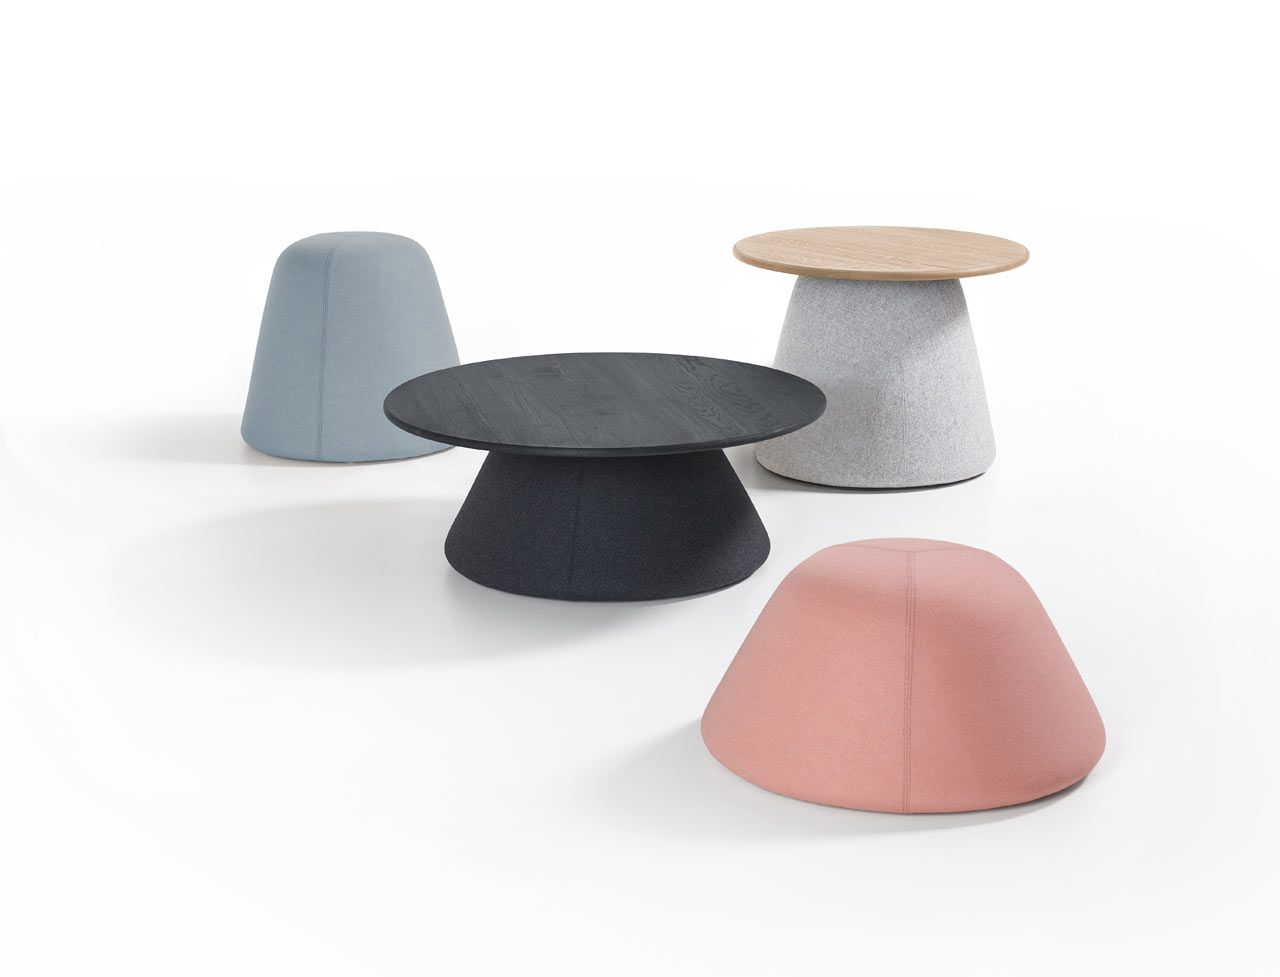 These cute and soft upholstered pieces, which are poufs and tables, were inspired by Dutch mounds